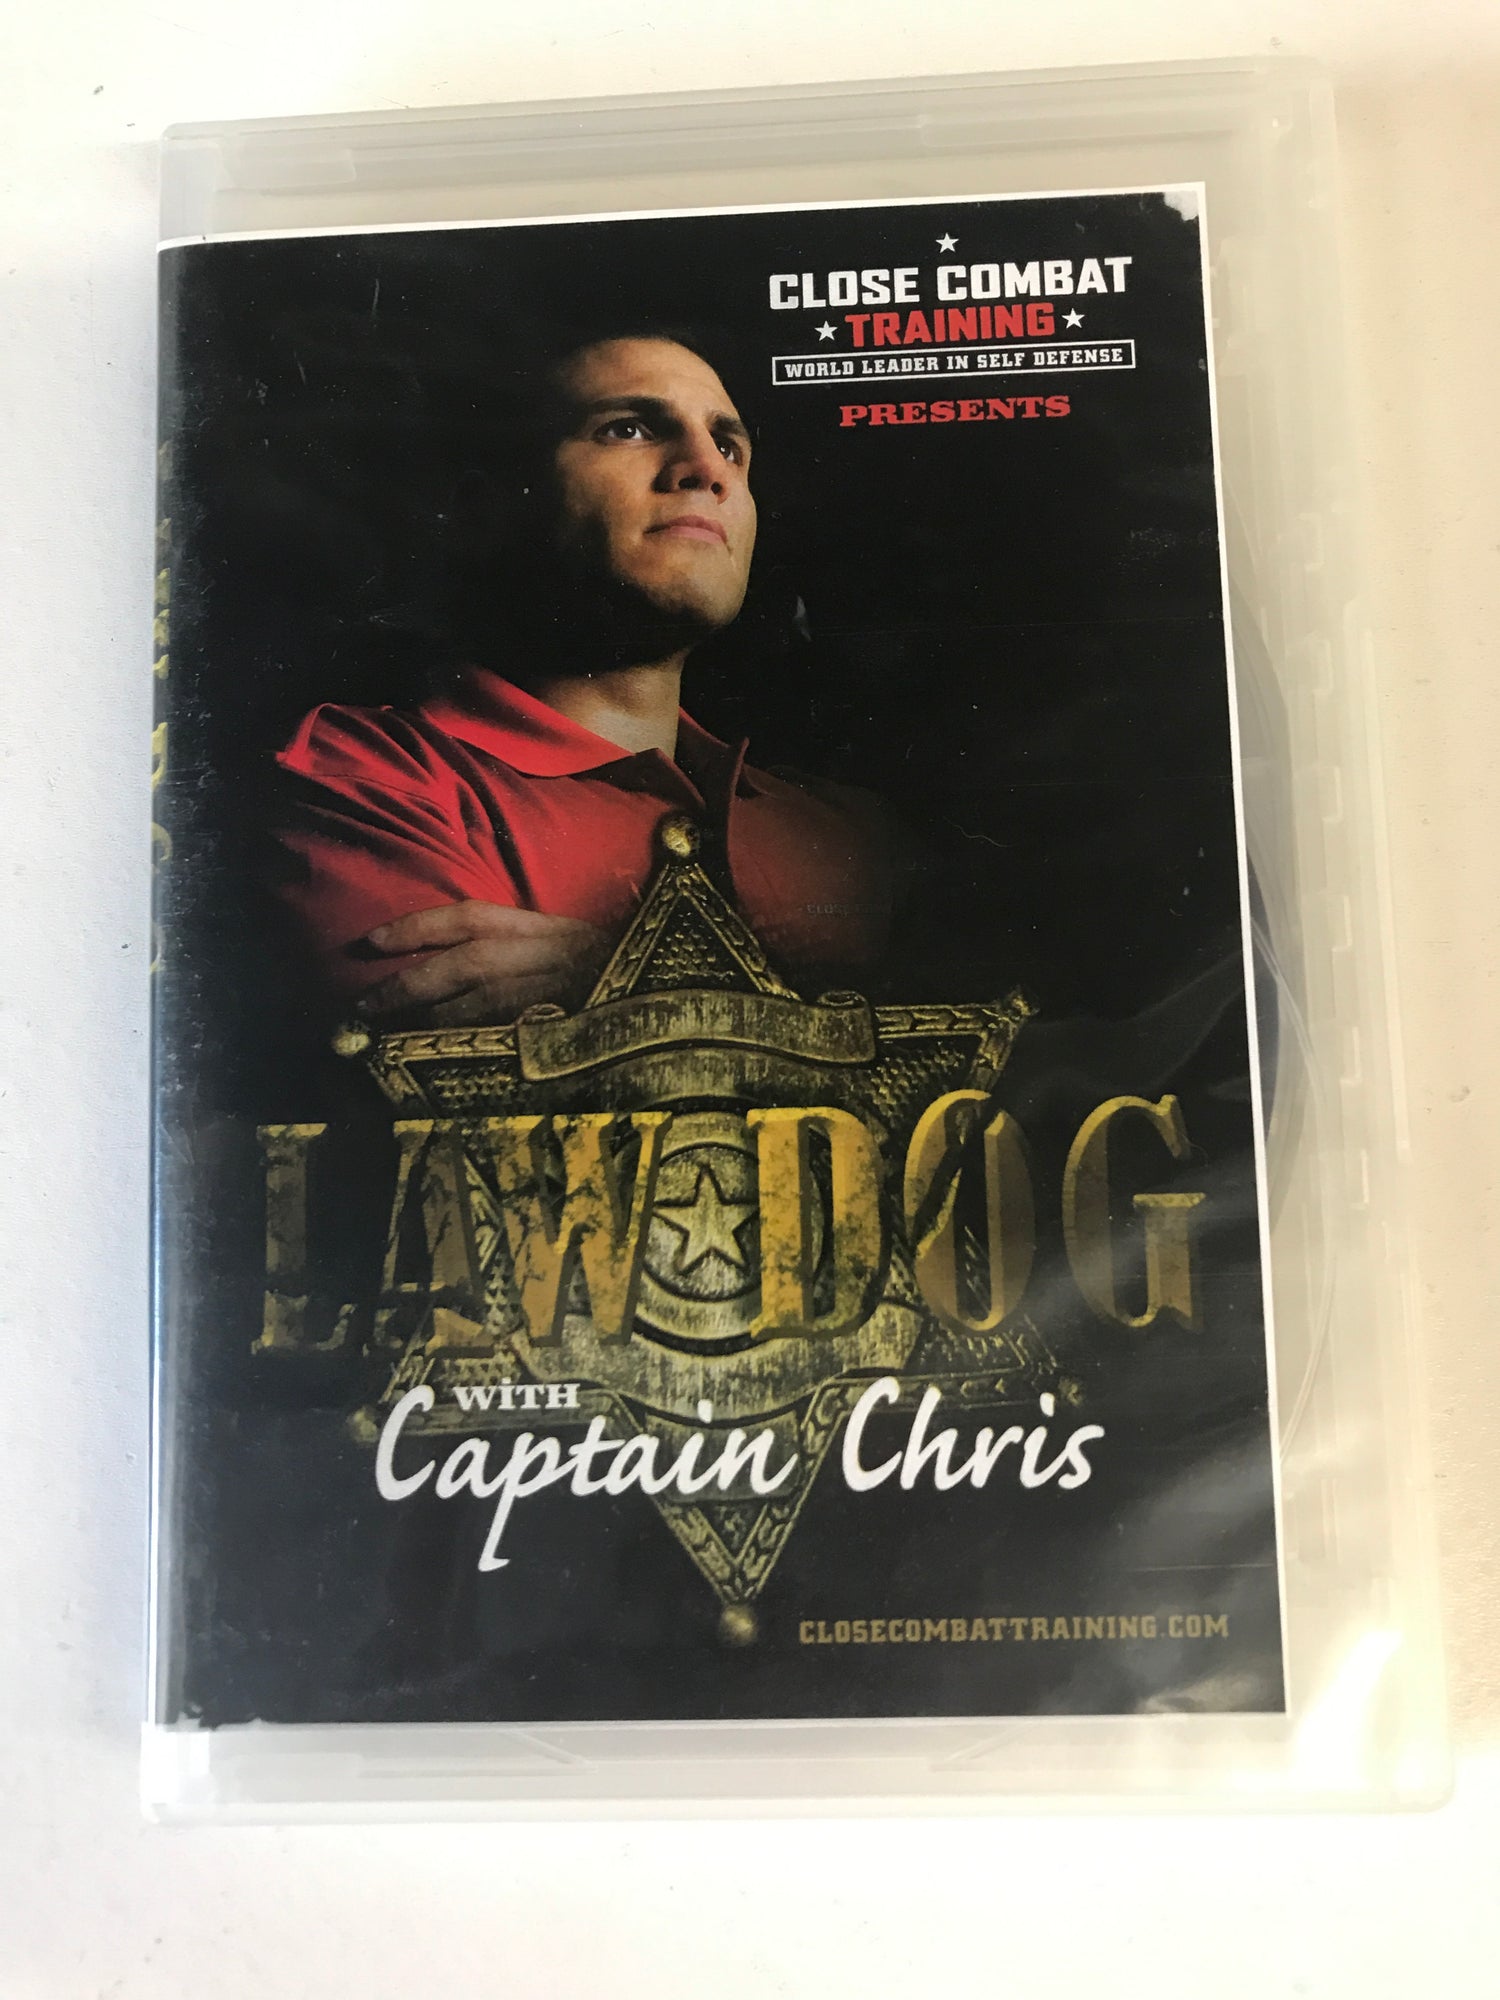 Law Dog 4 DVD Set with Captain Chris (Preowned) - Budovideos Inc